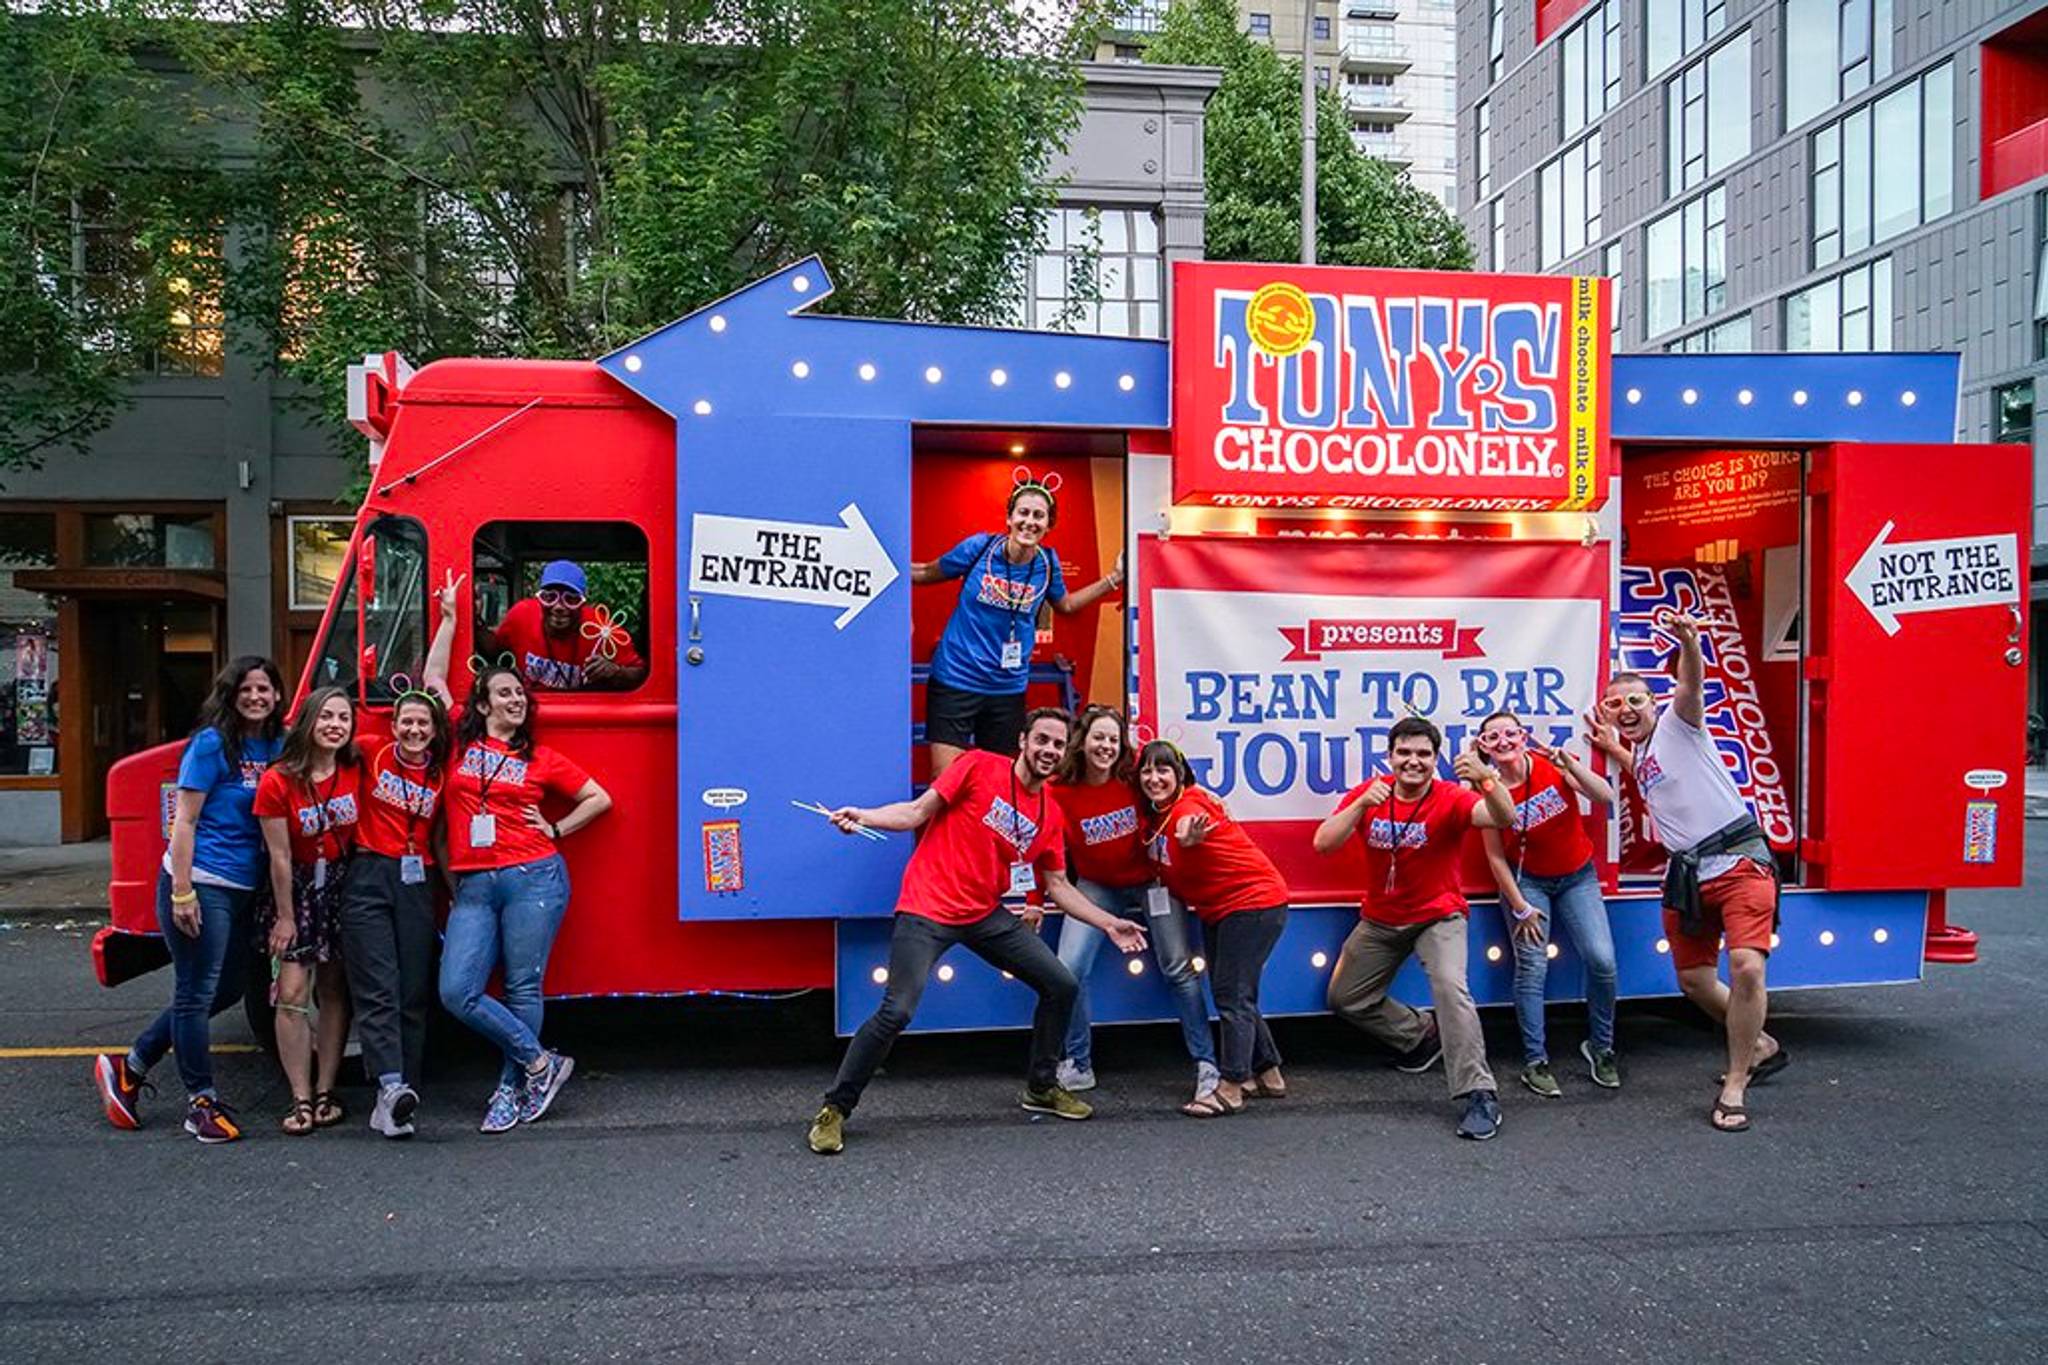 Tony’s Chocolonely: ethical treats for comfort-eaters